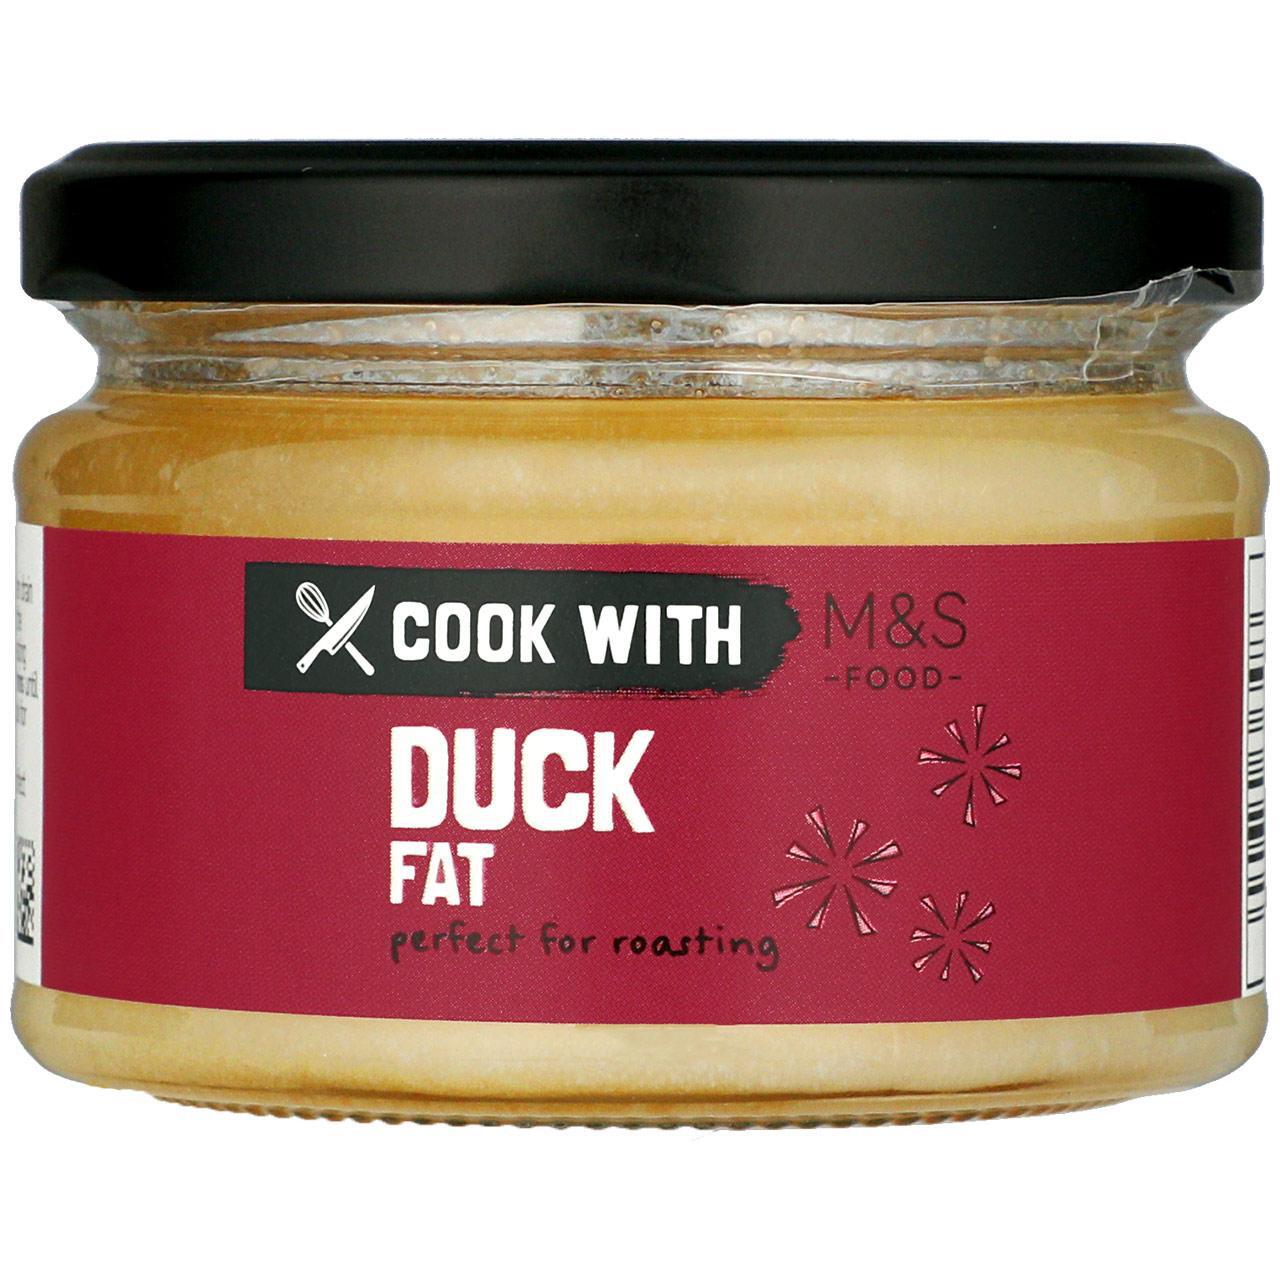 Cook With M&S Duck Fat 180g